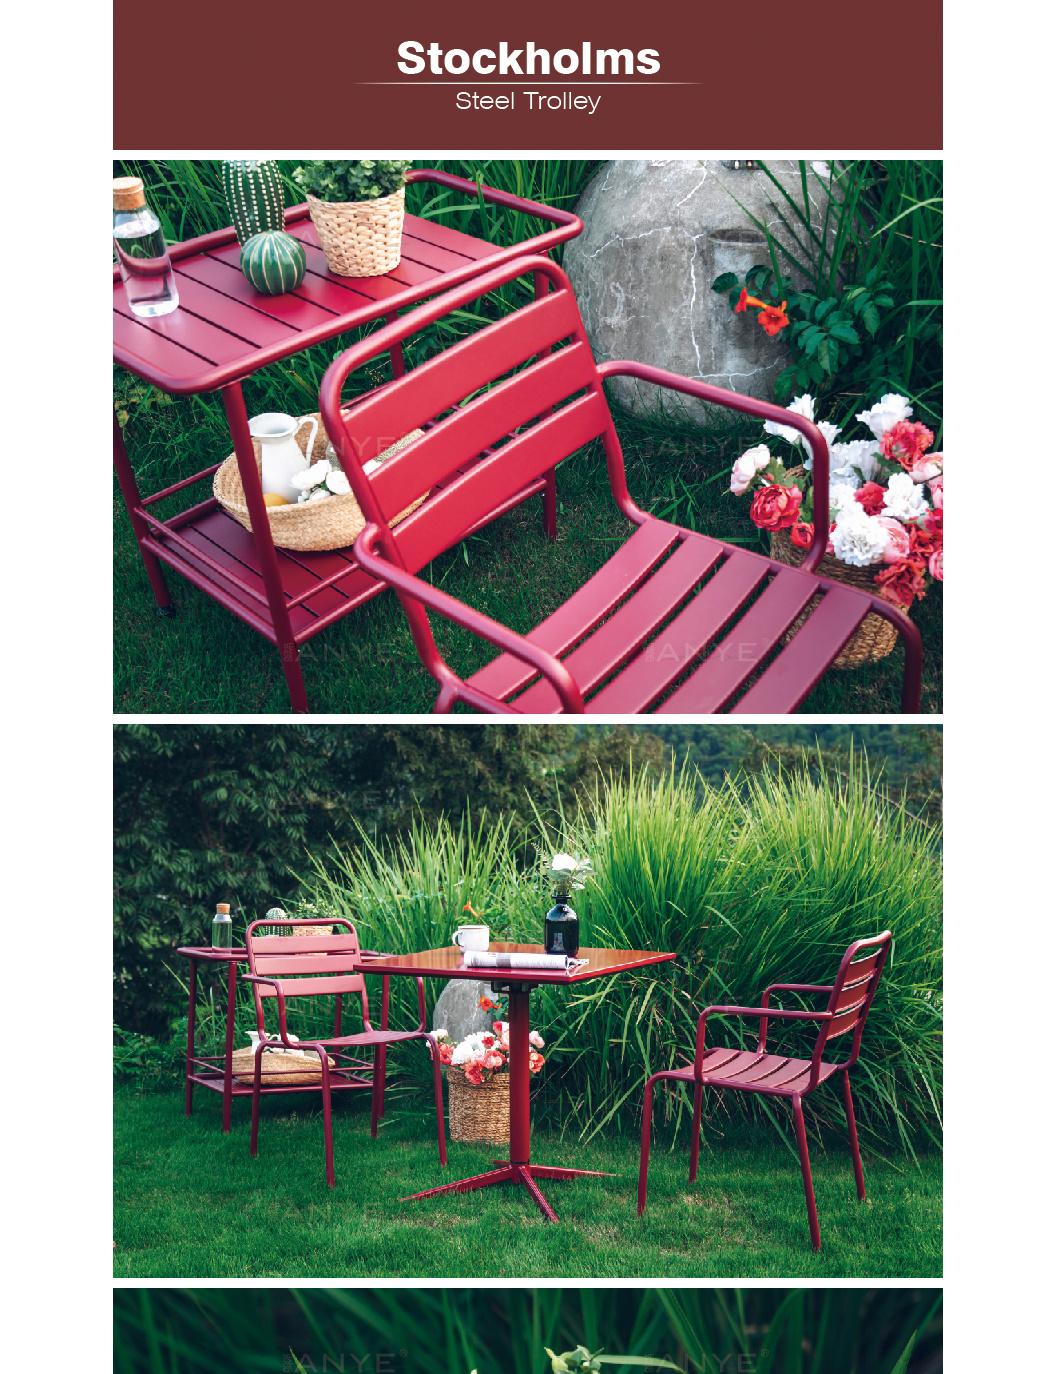 Portable Outdoor Furniture Durable Steel Trolly Garden Dining Cart Camping Cart Food Trolly Truck